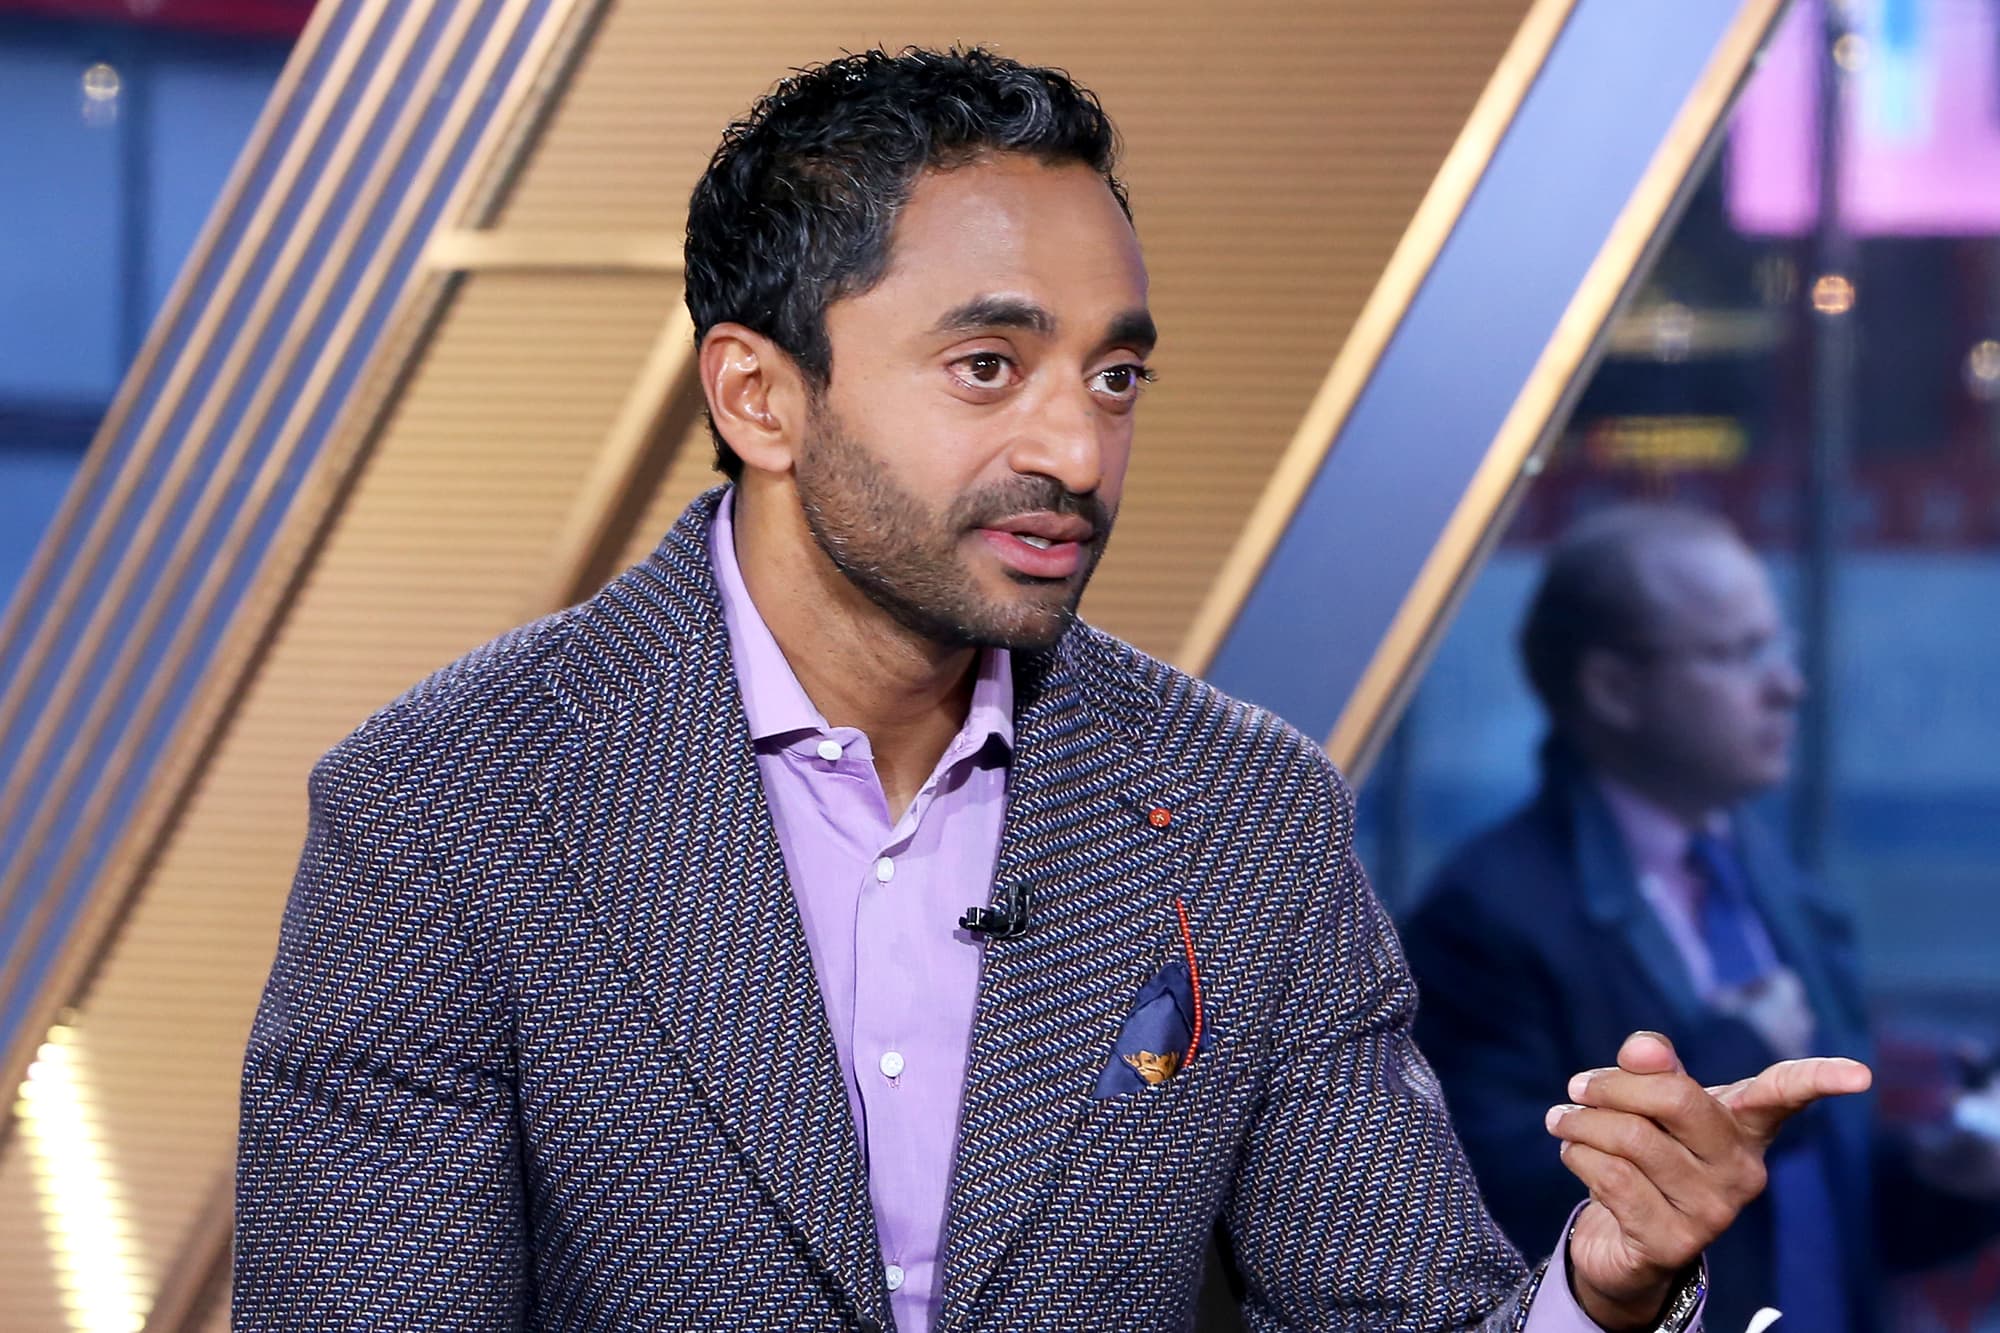 Chamath Palihapitiya rips airlines again and calls for more money to consumers and small businesses - CNBC